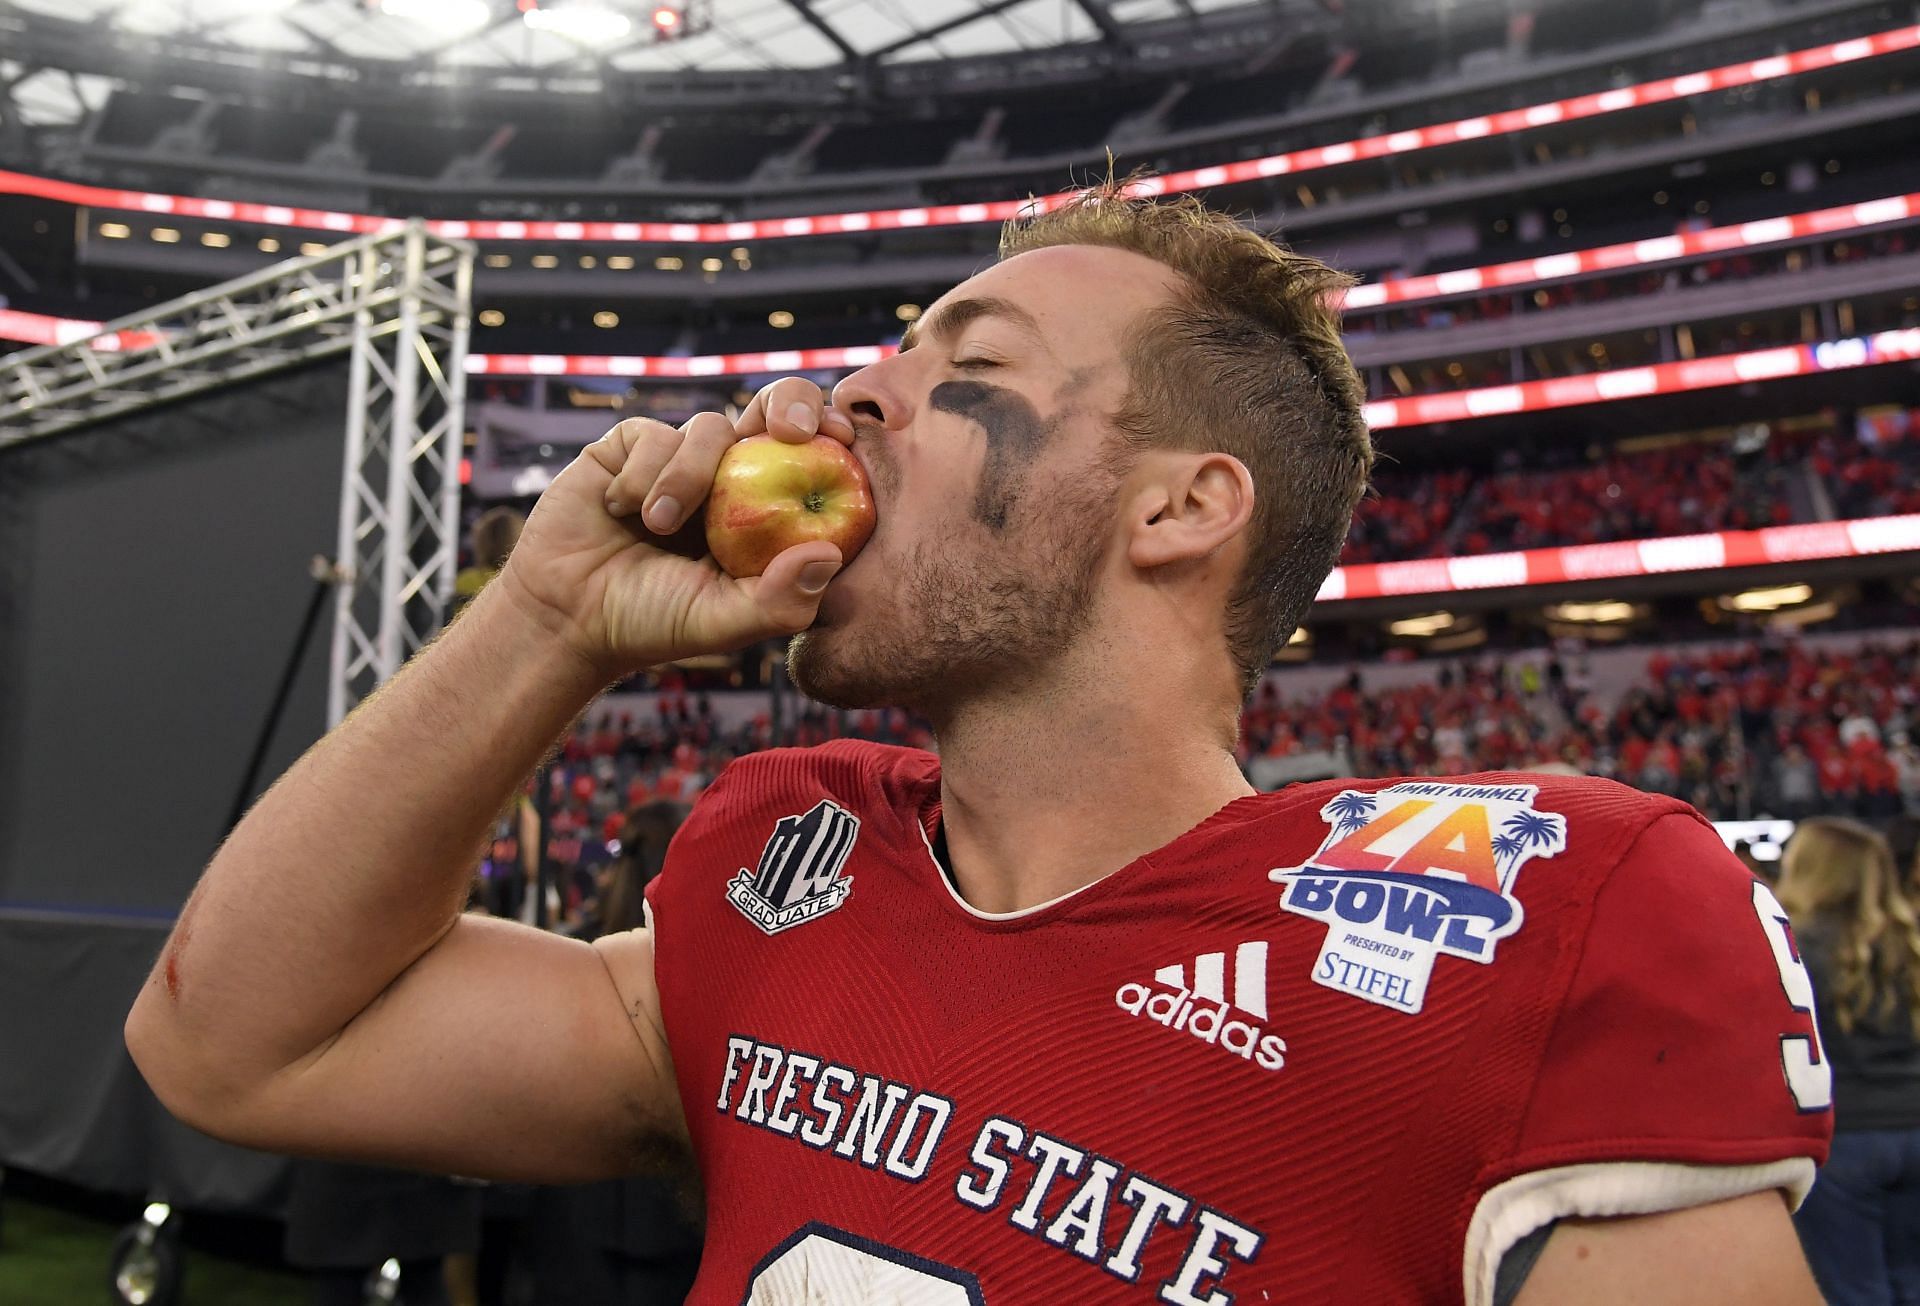 Quarterback Jake Haener of the Fresno State Bulldogs takes a bite out of an apple after defeating the Washington State Cougars